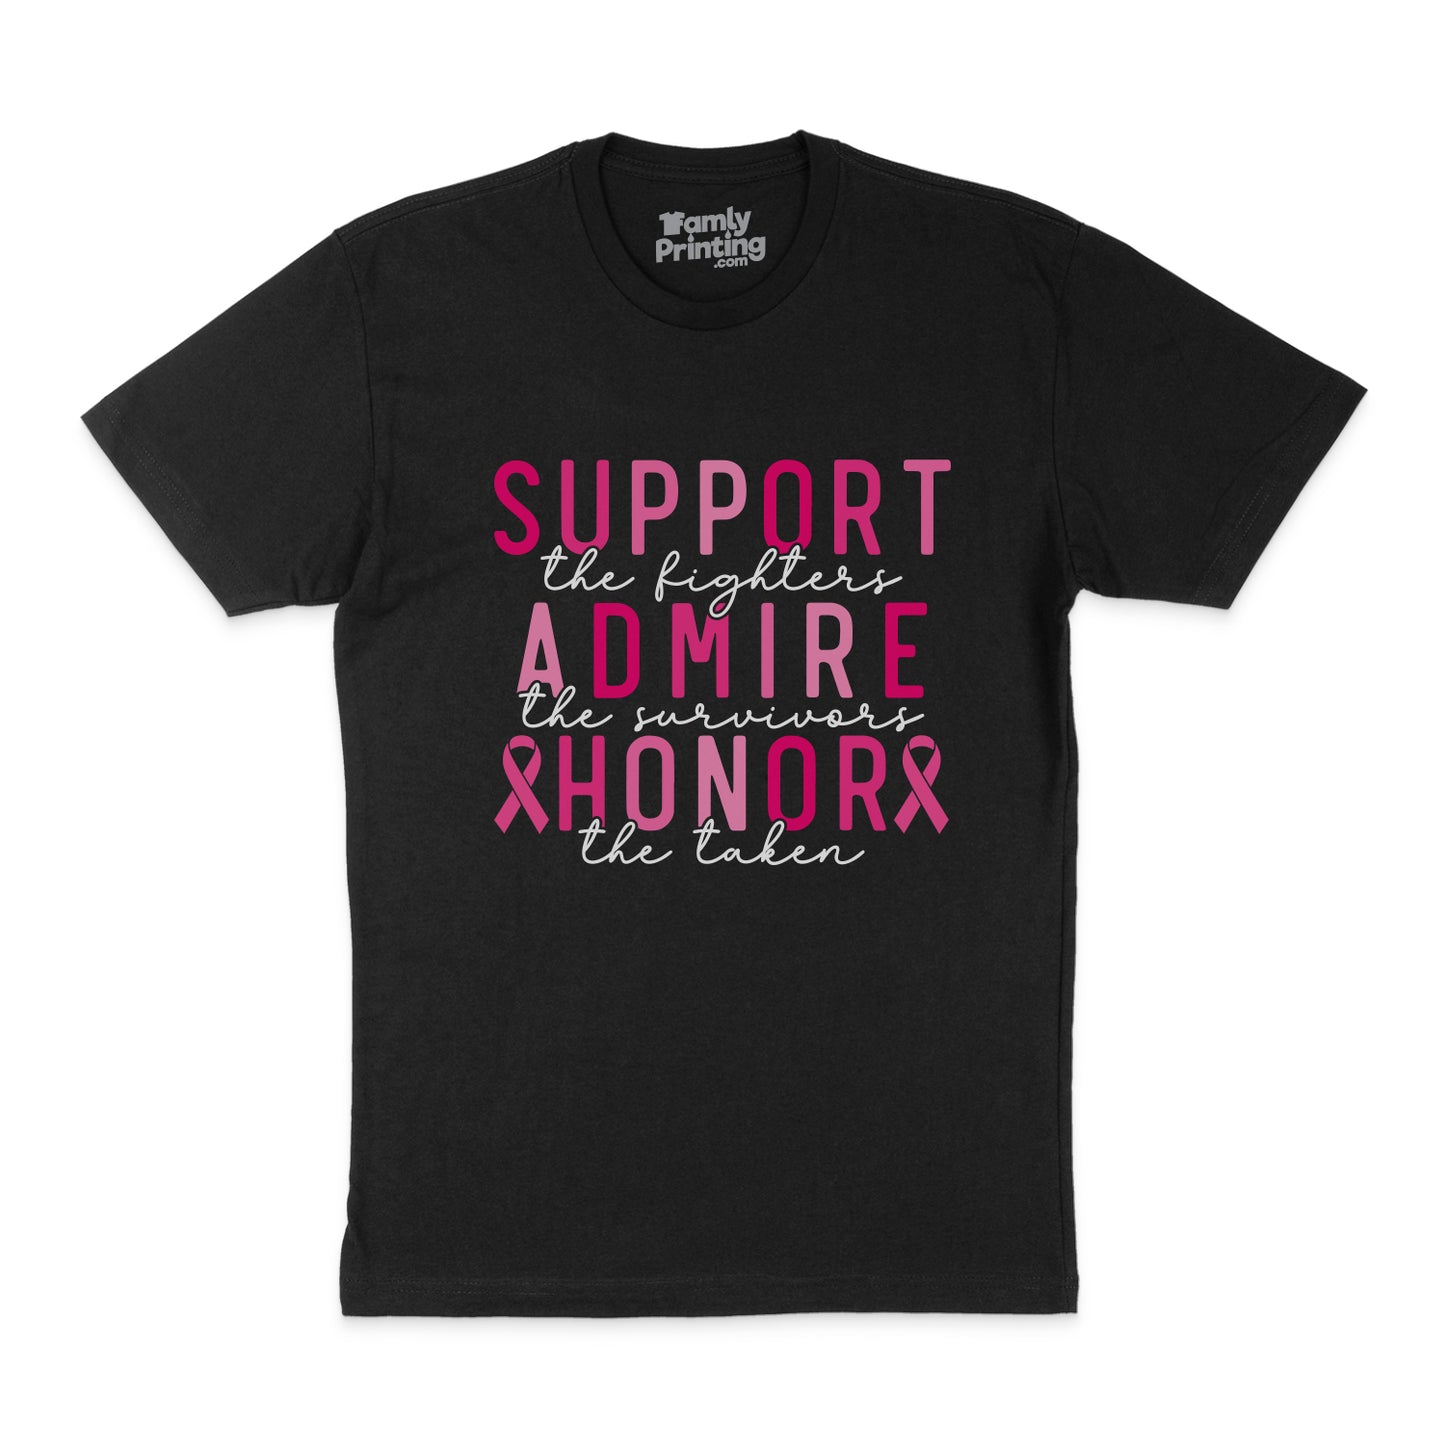 Support, Admire, & Honor